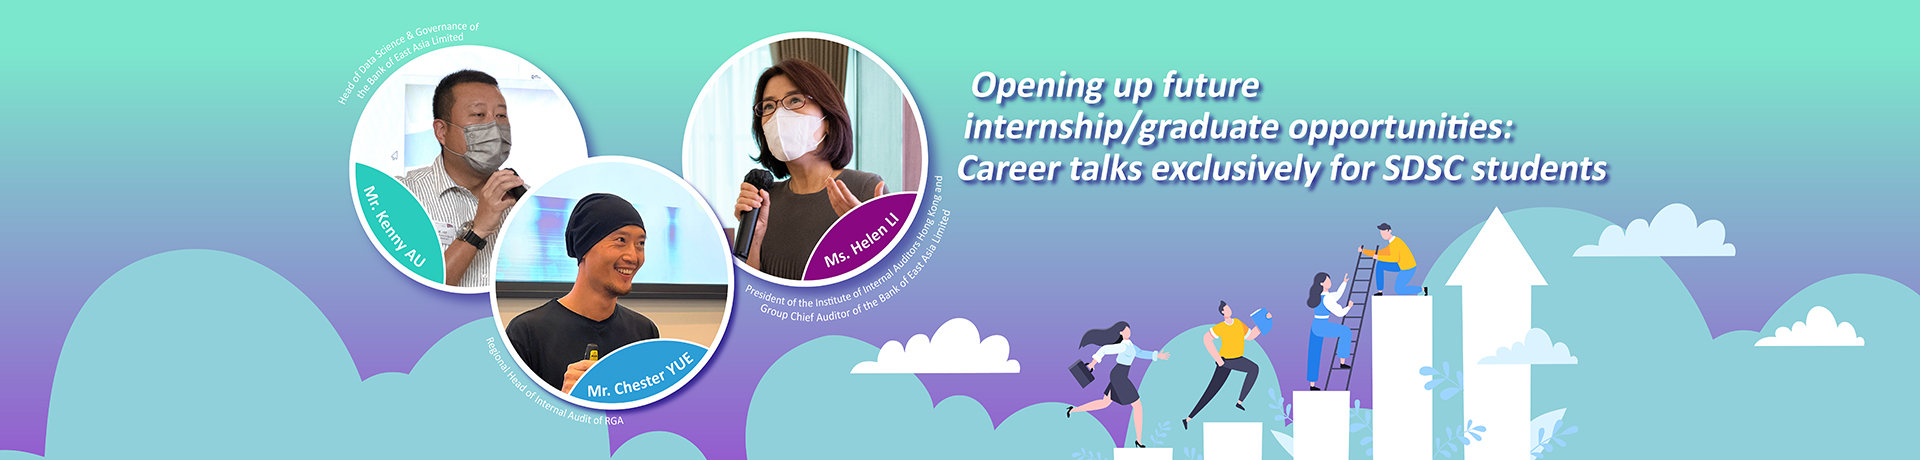 Opening up future internship/graduate opportunities: career talks exclusively for SDSC students